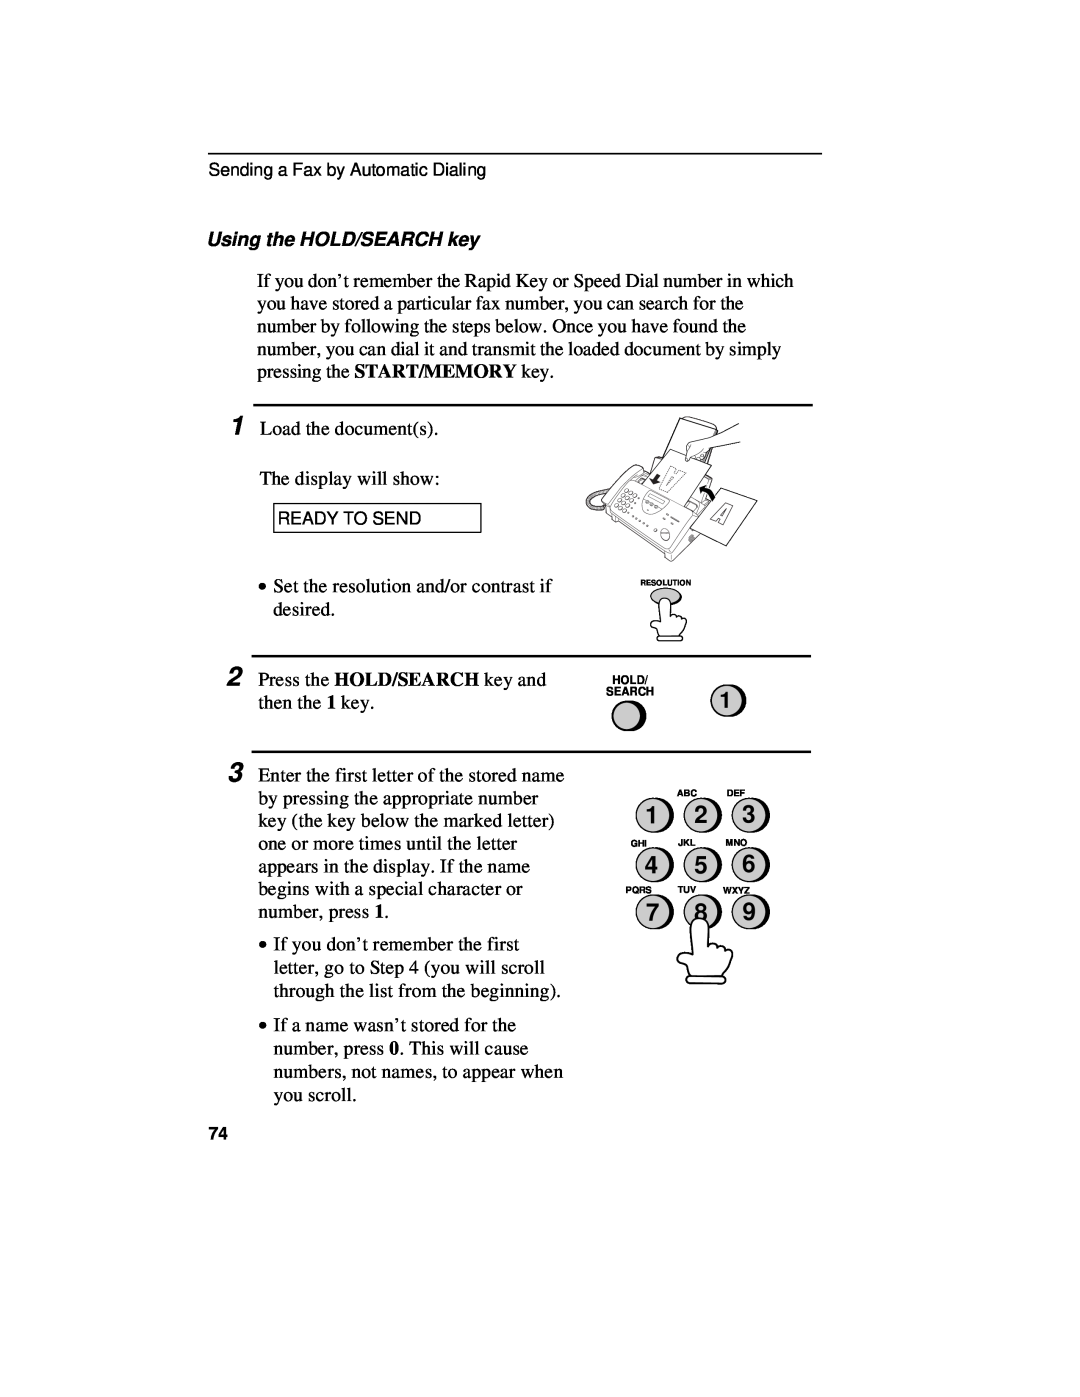 Sharp UX-460 operation manual Using the HOLD/SEARCH key, Hold Search 